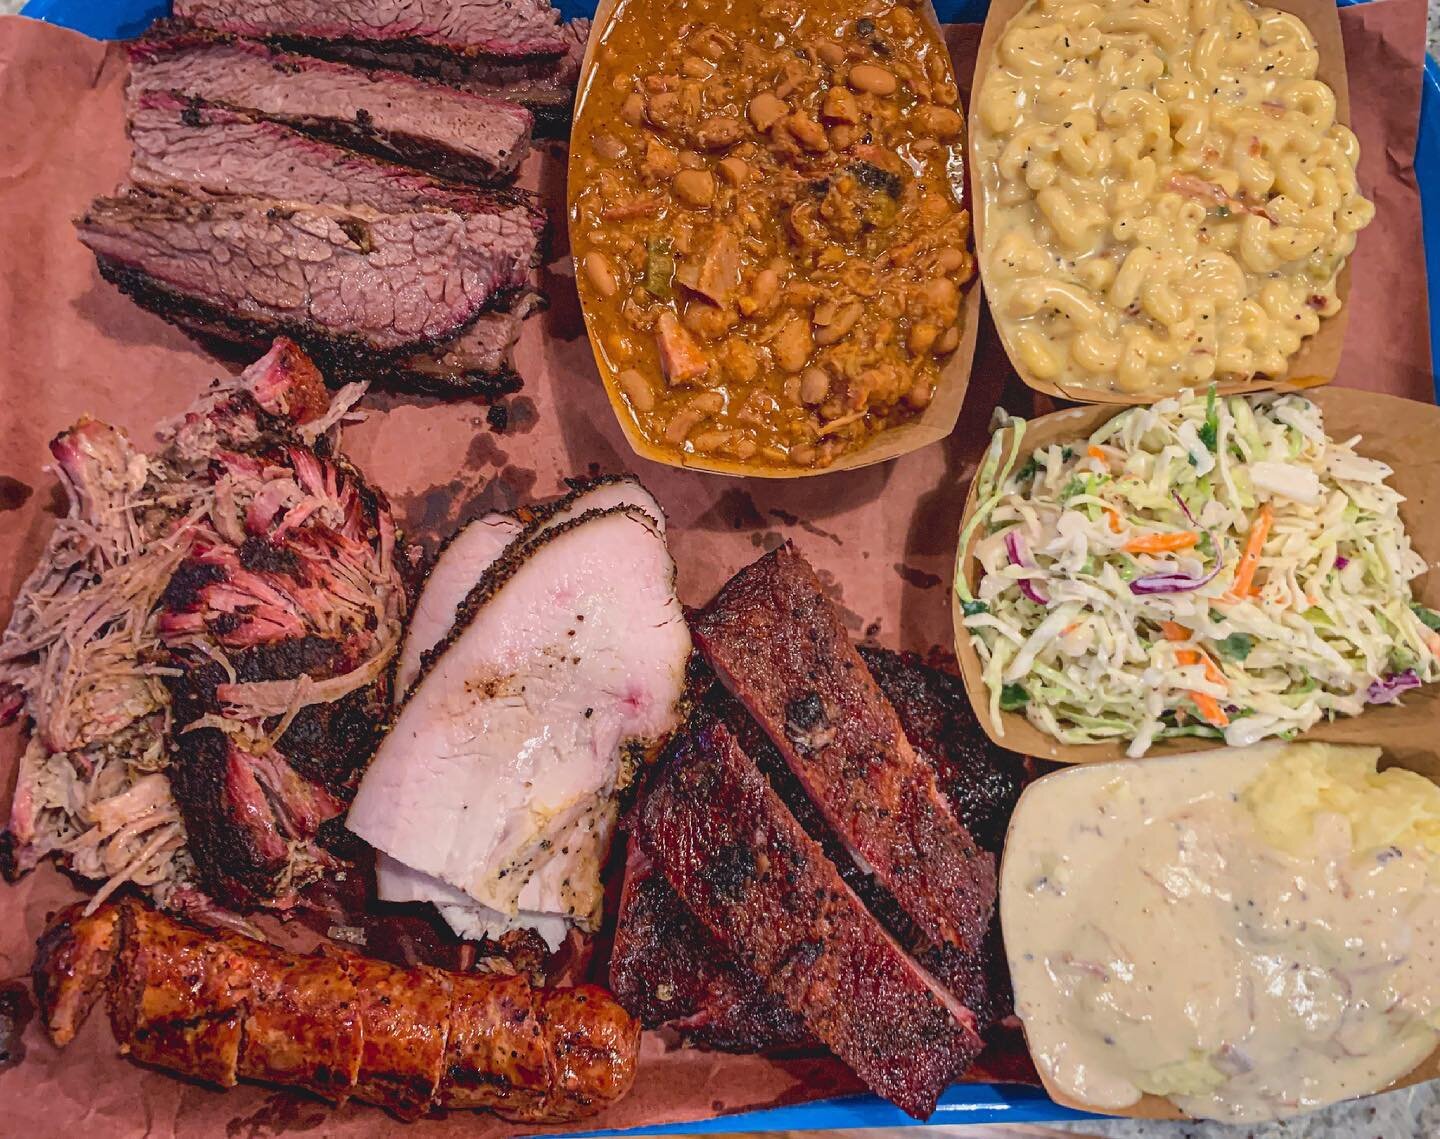 Consider this a warm-up tray for Saturday&rsquo;s Whole Hog Party. 😏

Don&rsquo;t forget this Saturday we&rsquo;re celebrating our 2 year anniversary with a 135-pound hog roast from our friends @edwardsmeats. Come here early because this is a guaran